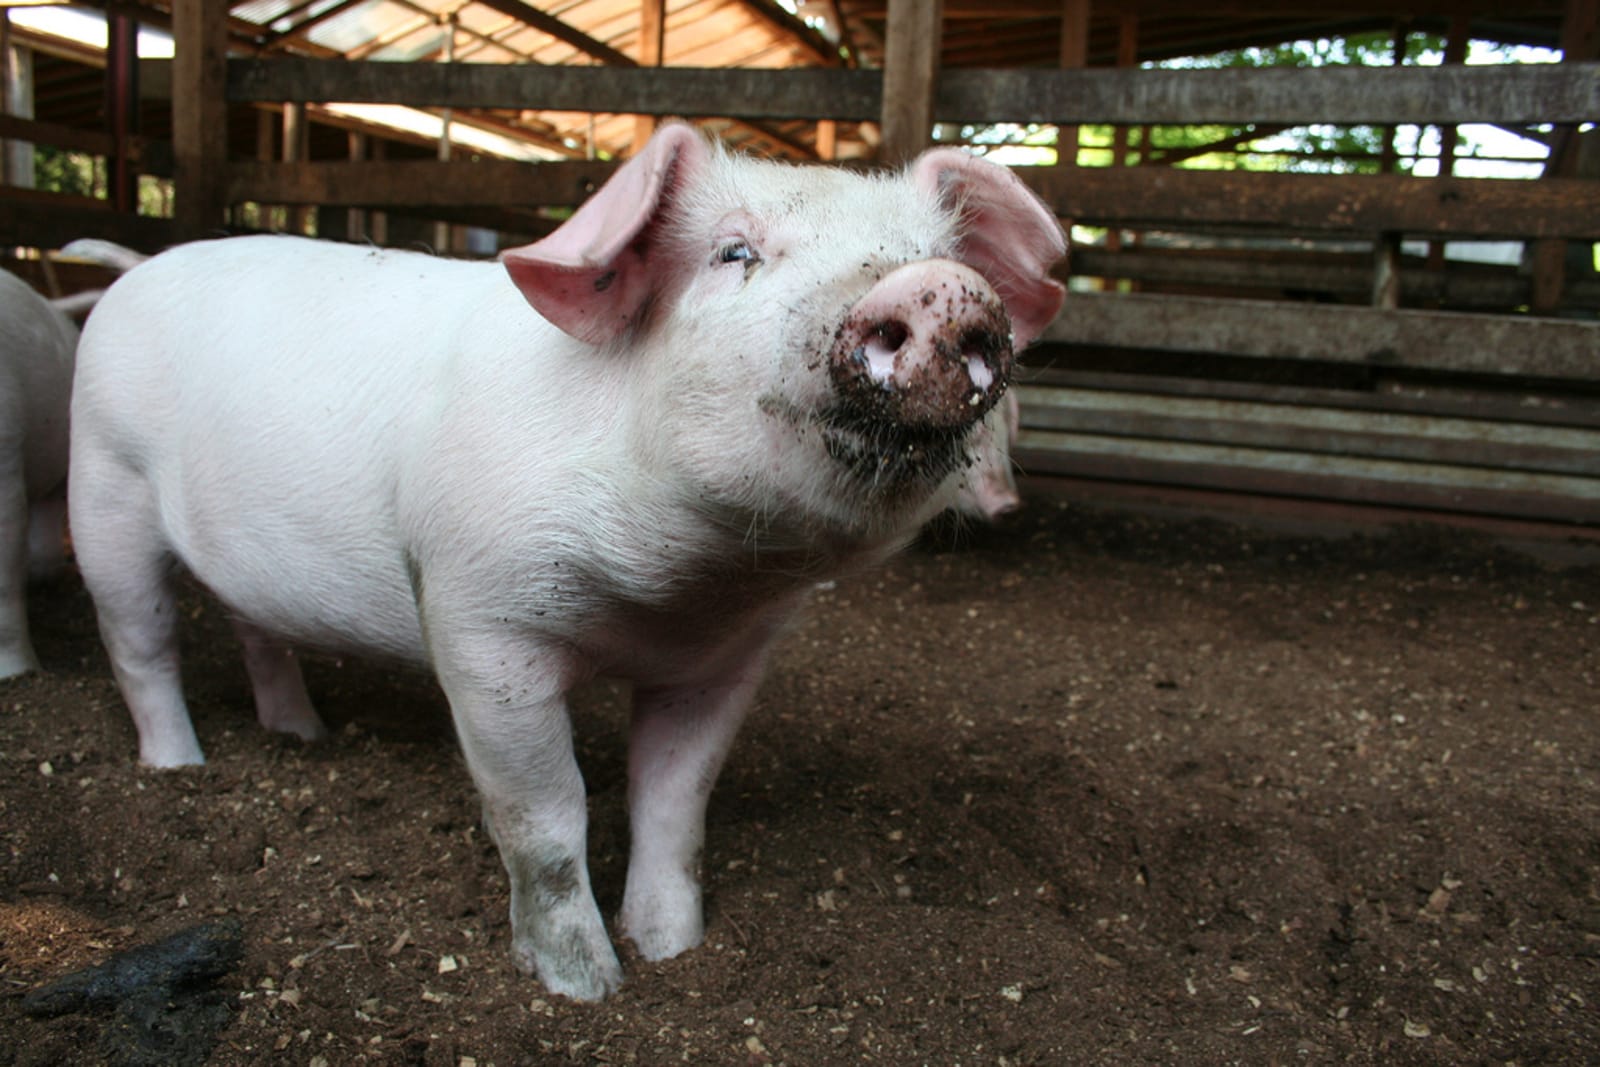 9 States That Have Banned Gestation Crates